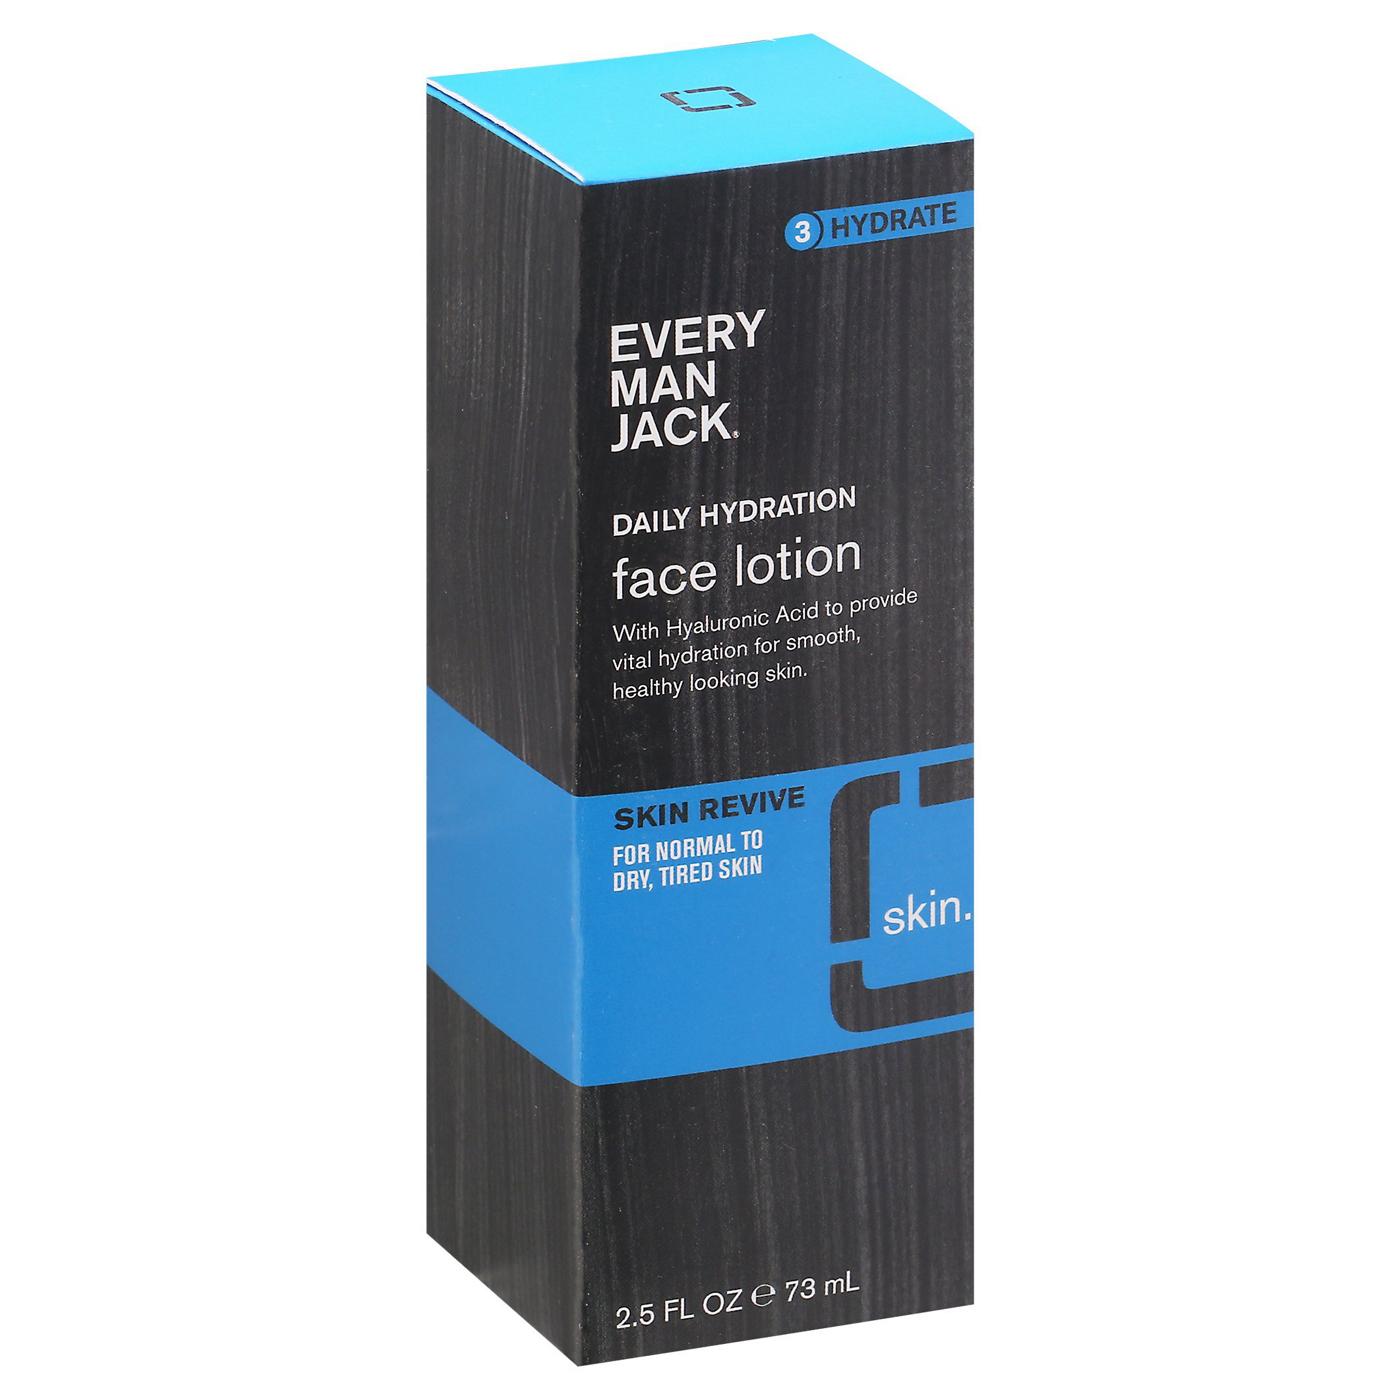 Every Man Jack Skin Revive Face Lotion; image 1 of 2